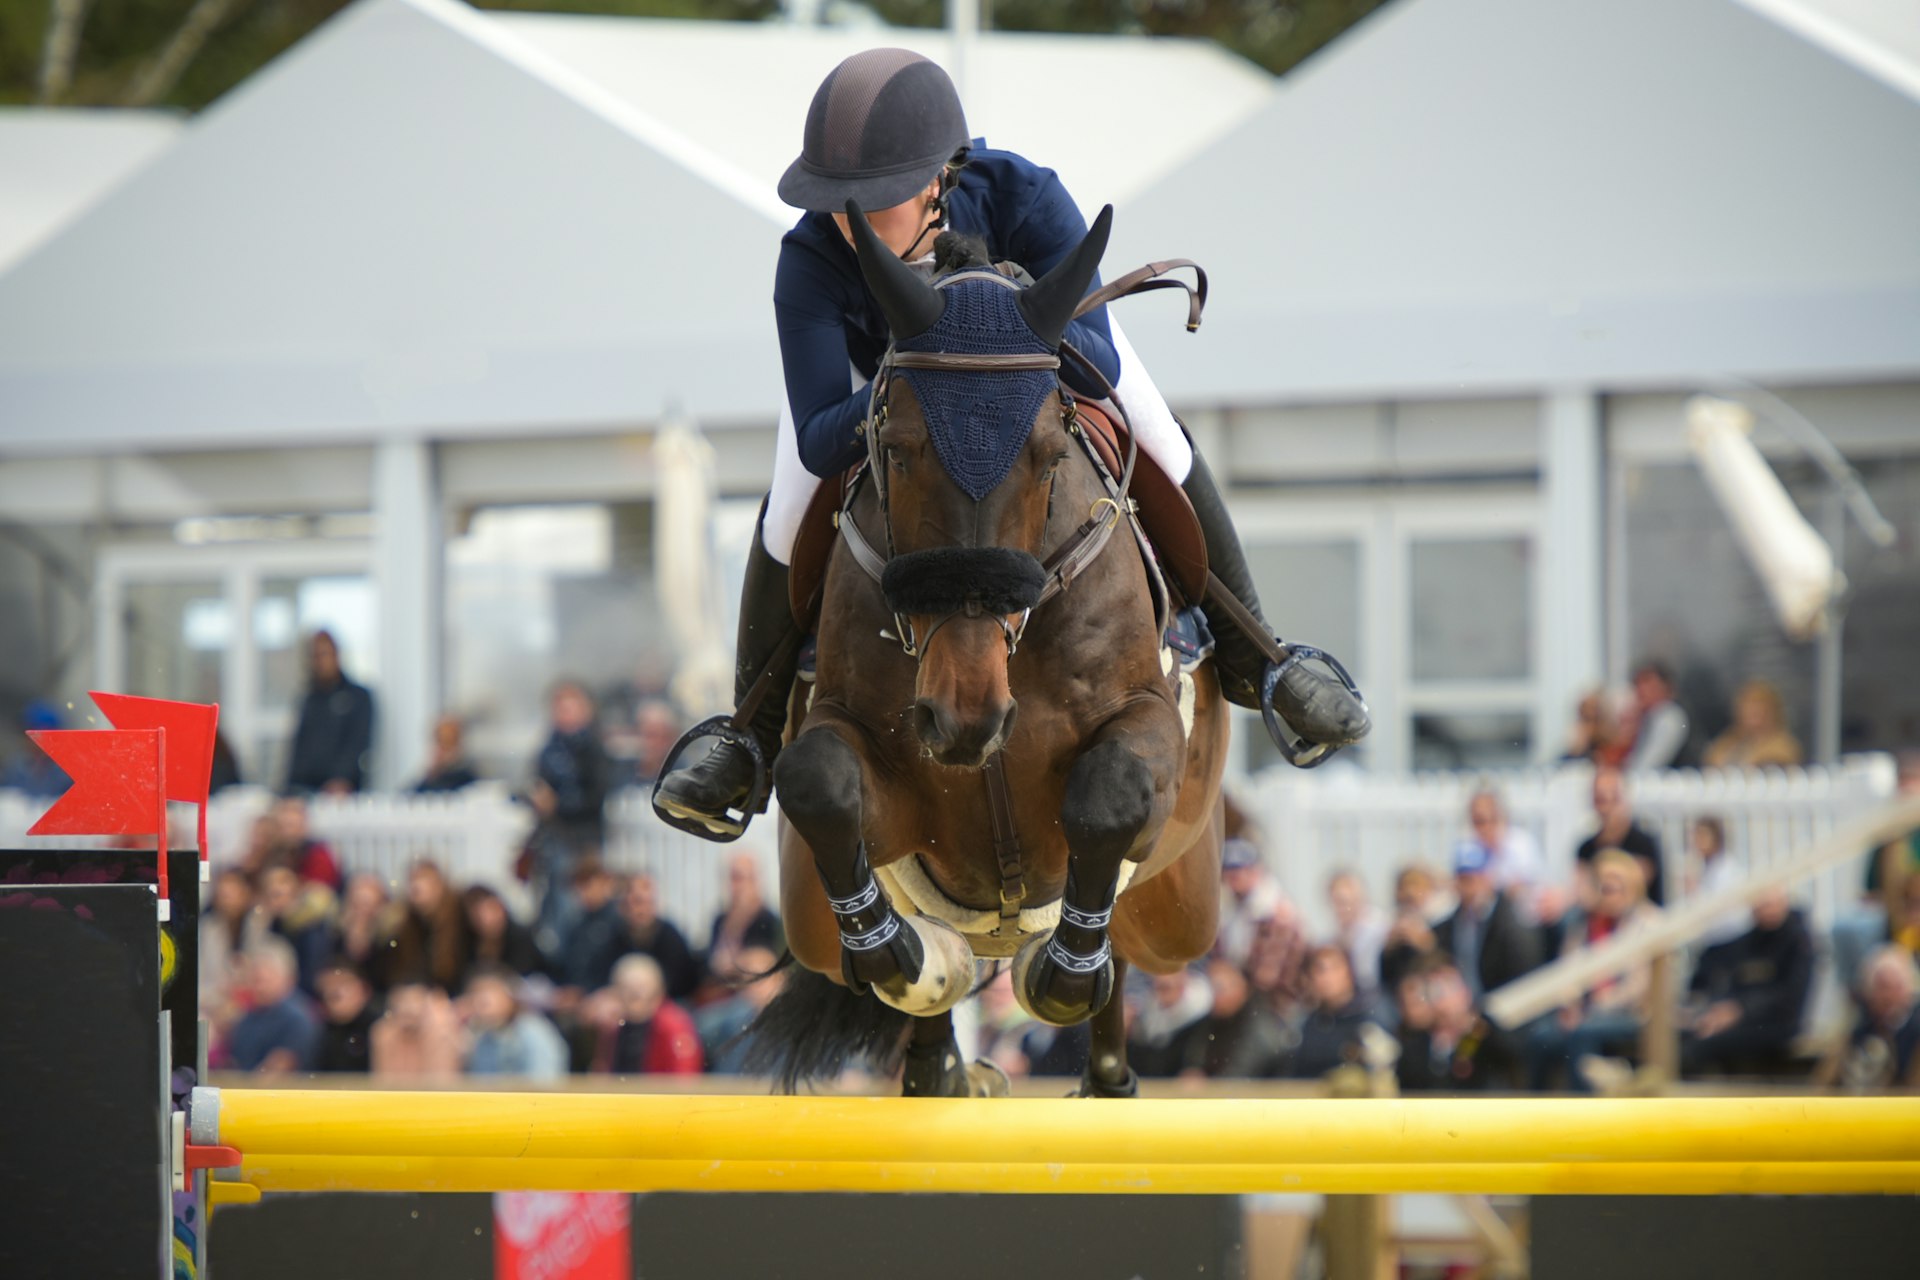 Closeup on an equestrian show-jumping competition in the city of Fontainebleau